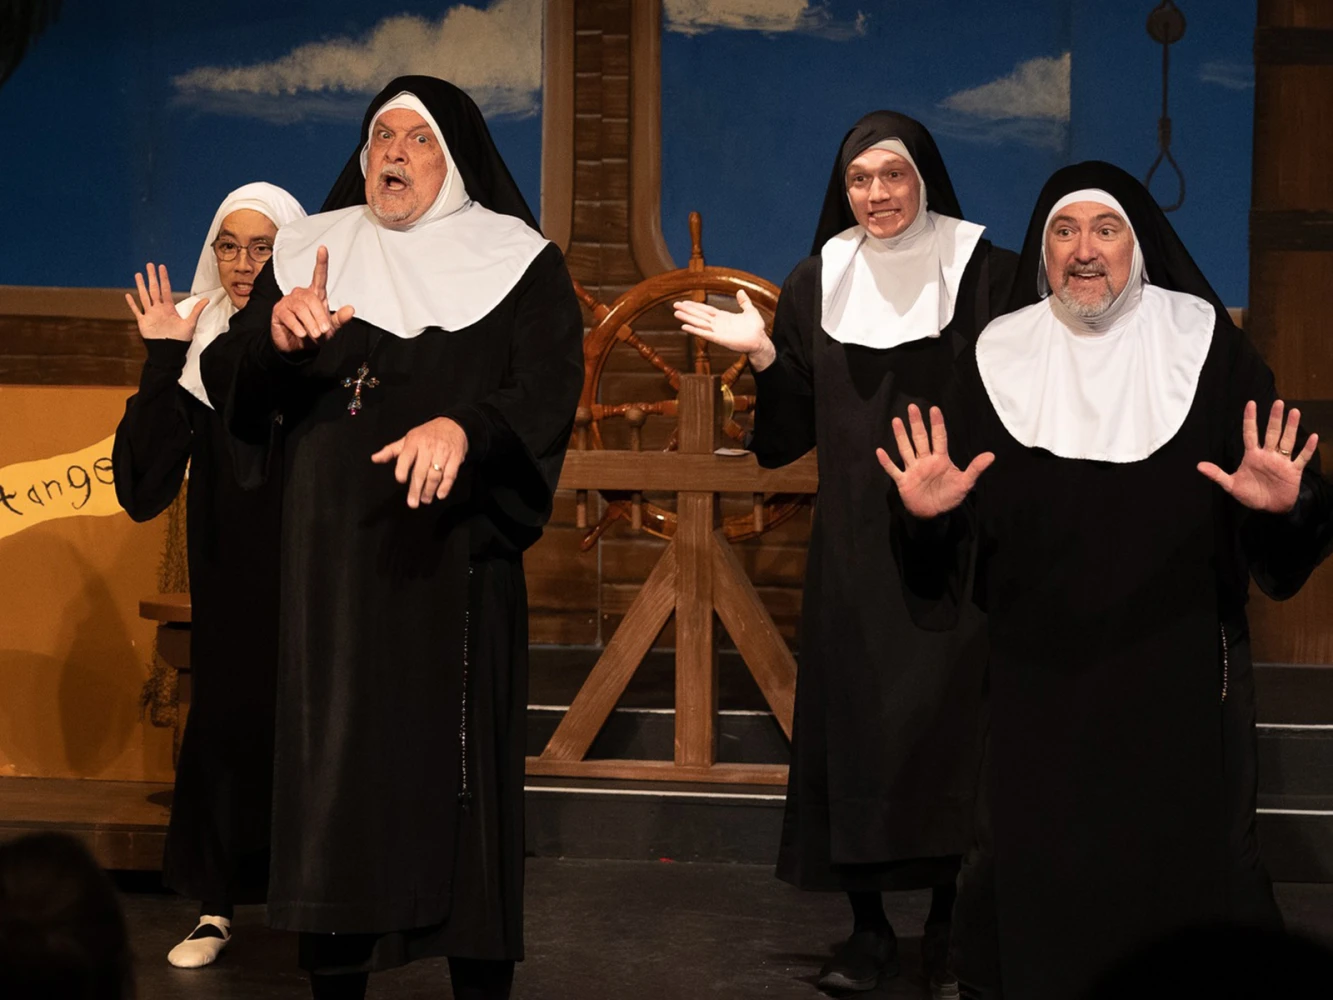 NUNSENSE: What to expect - 7